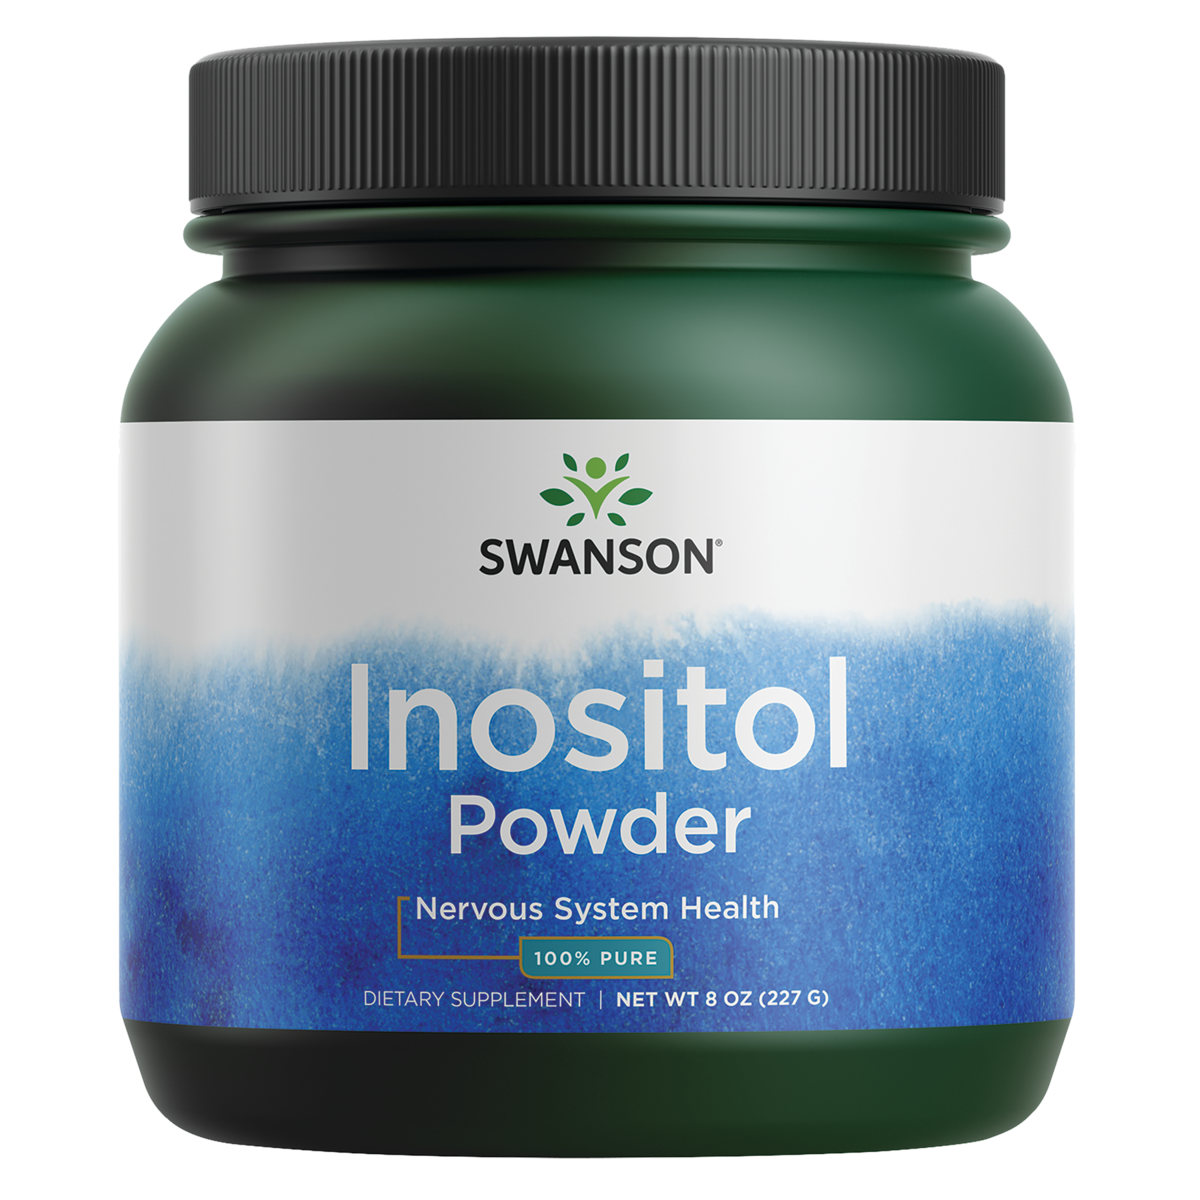 Swanson 100% Pure Inositol Powder - Natural Supplement Promoting Focus, Mental Relaxation & Mood Support - Supports Nervous System & Cellular Health - (8oz) - image 1 of 5